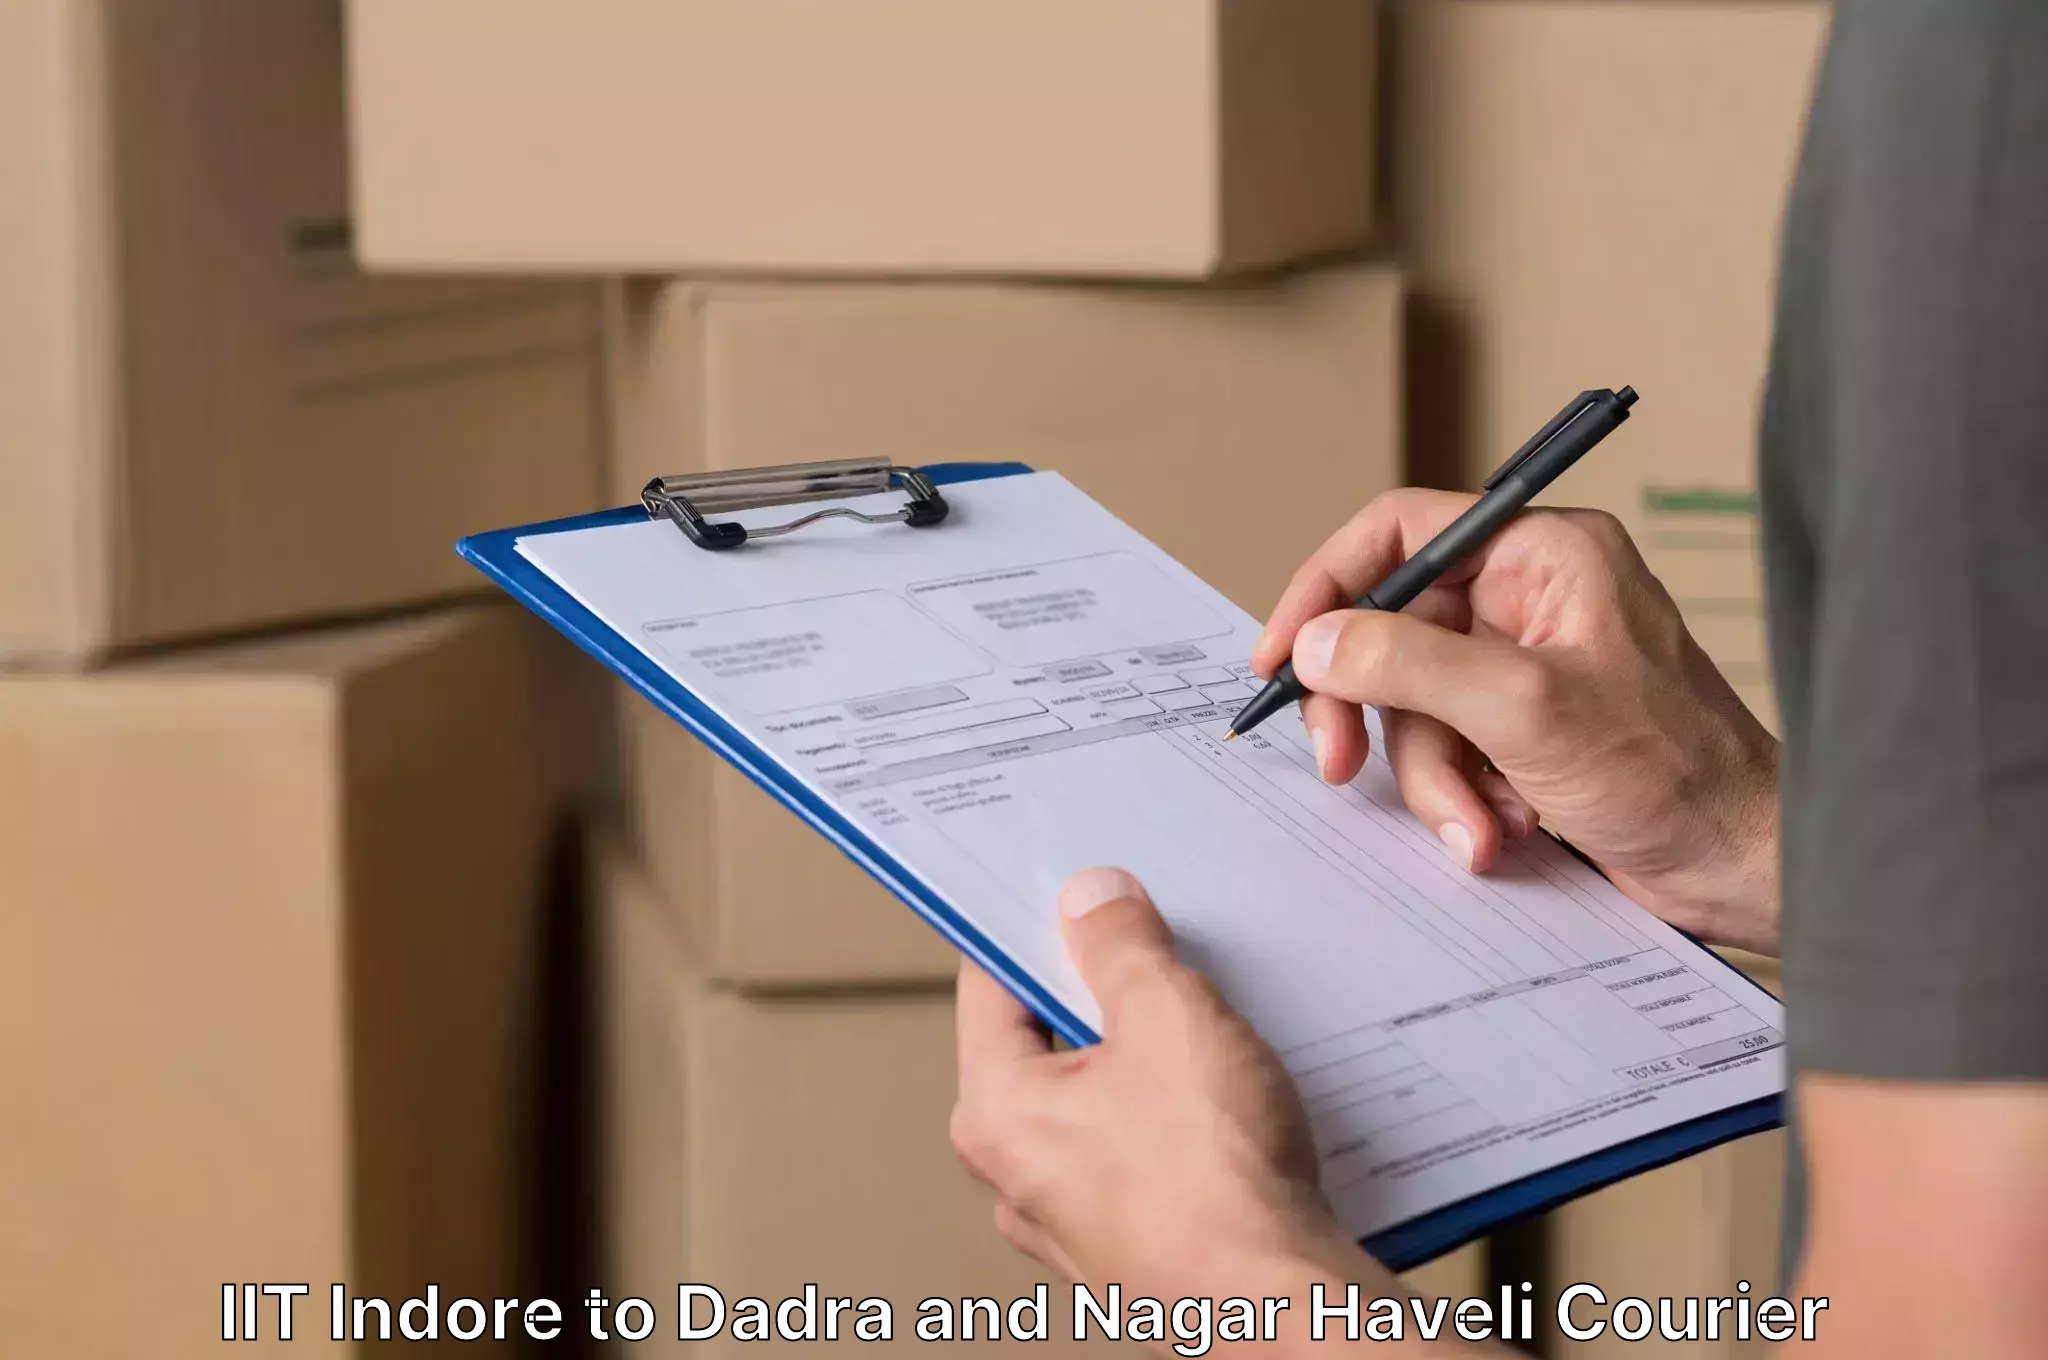 Moving and storage services IIT Indore to Dadra and Nagar Haveli